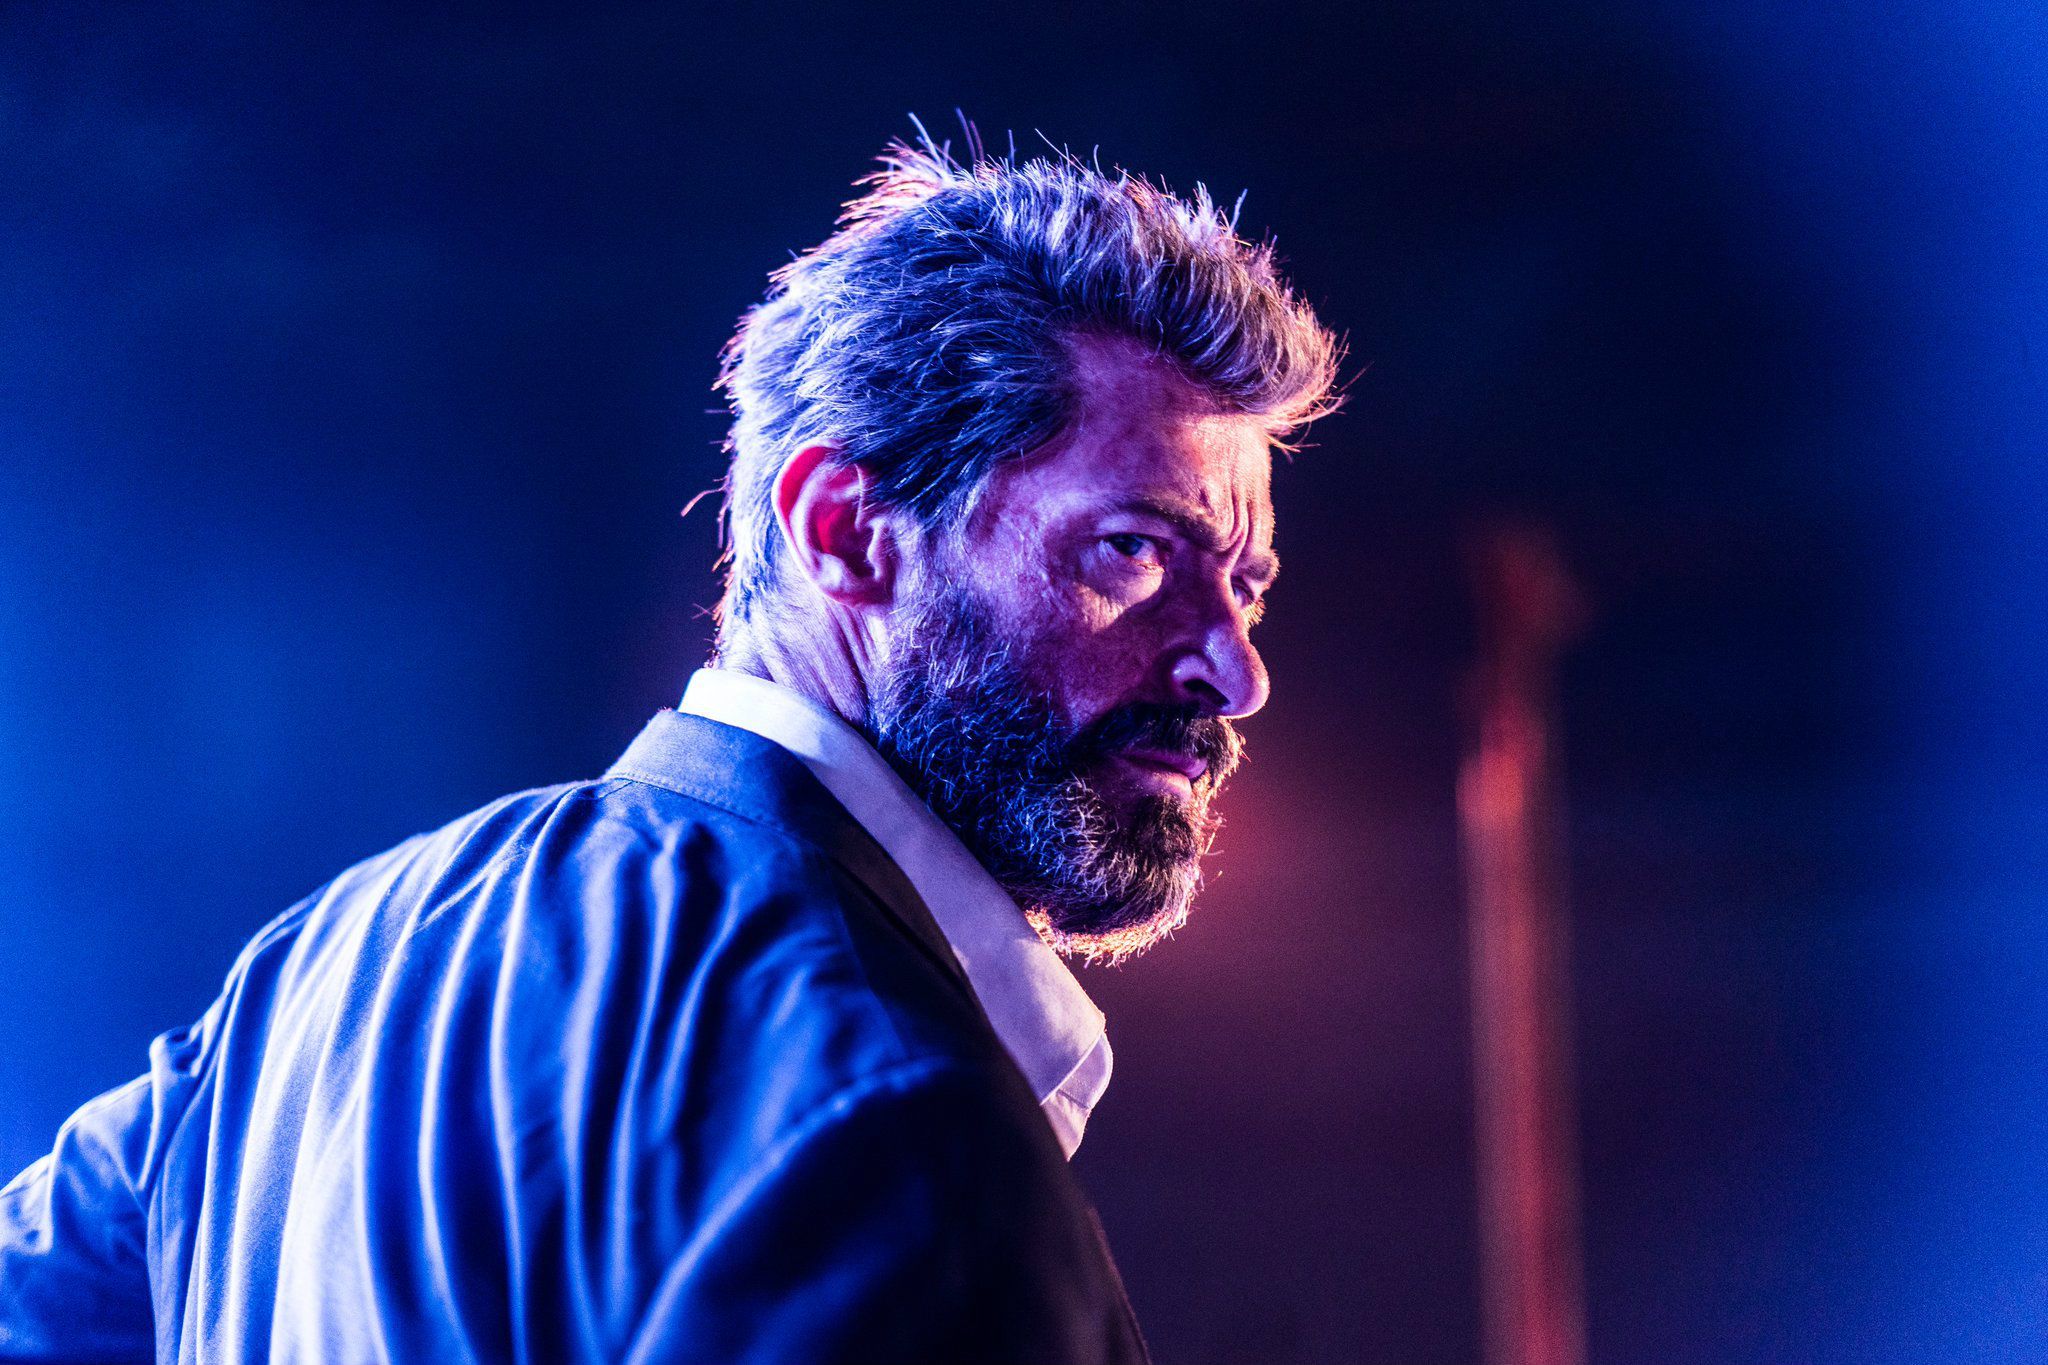 Wolverine Watches His Back in New Logan Image